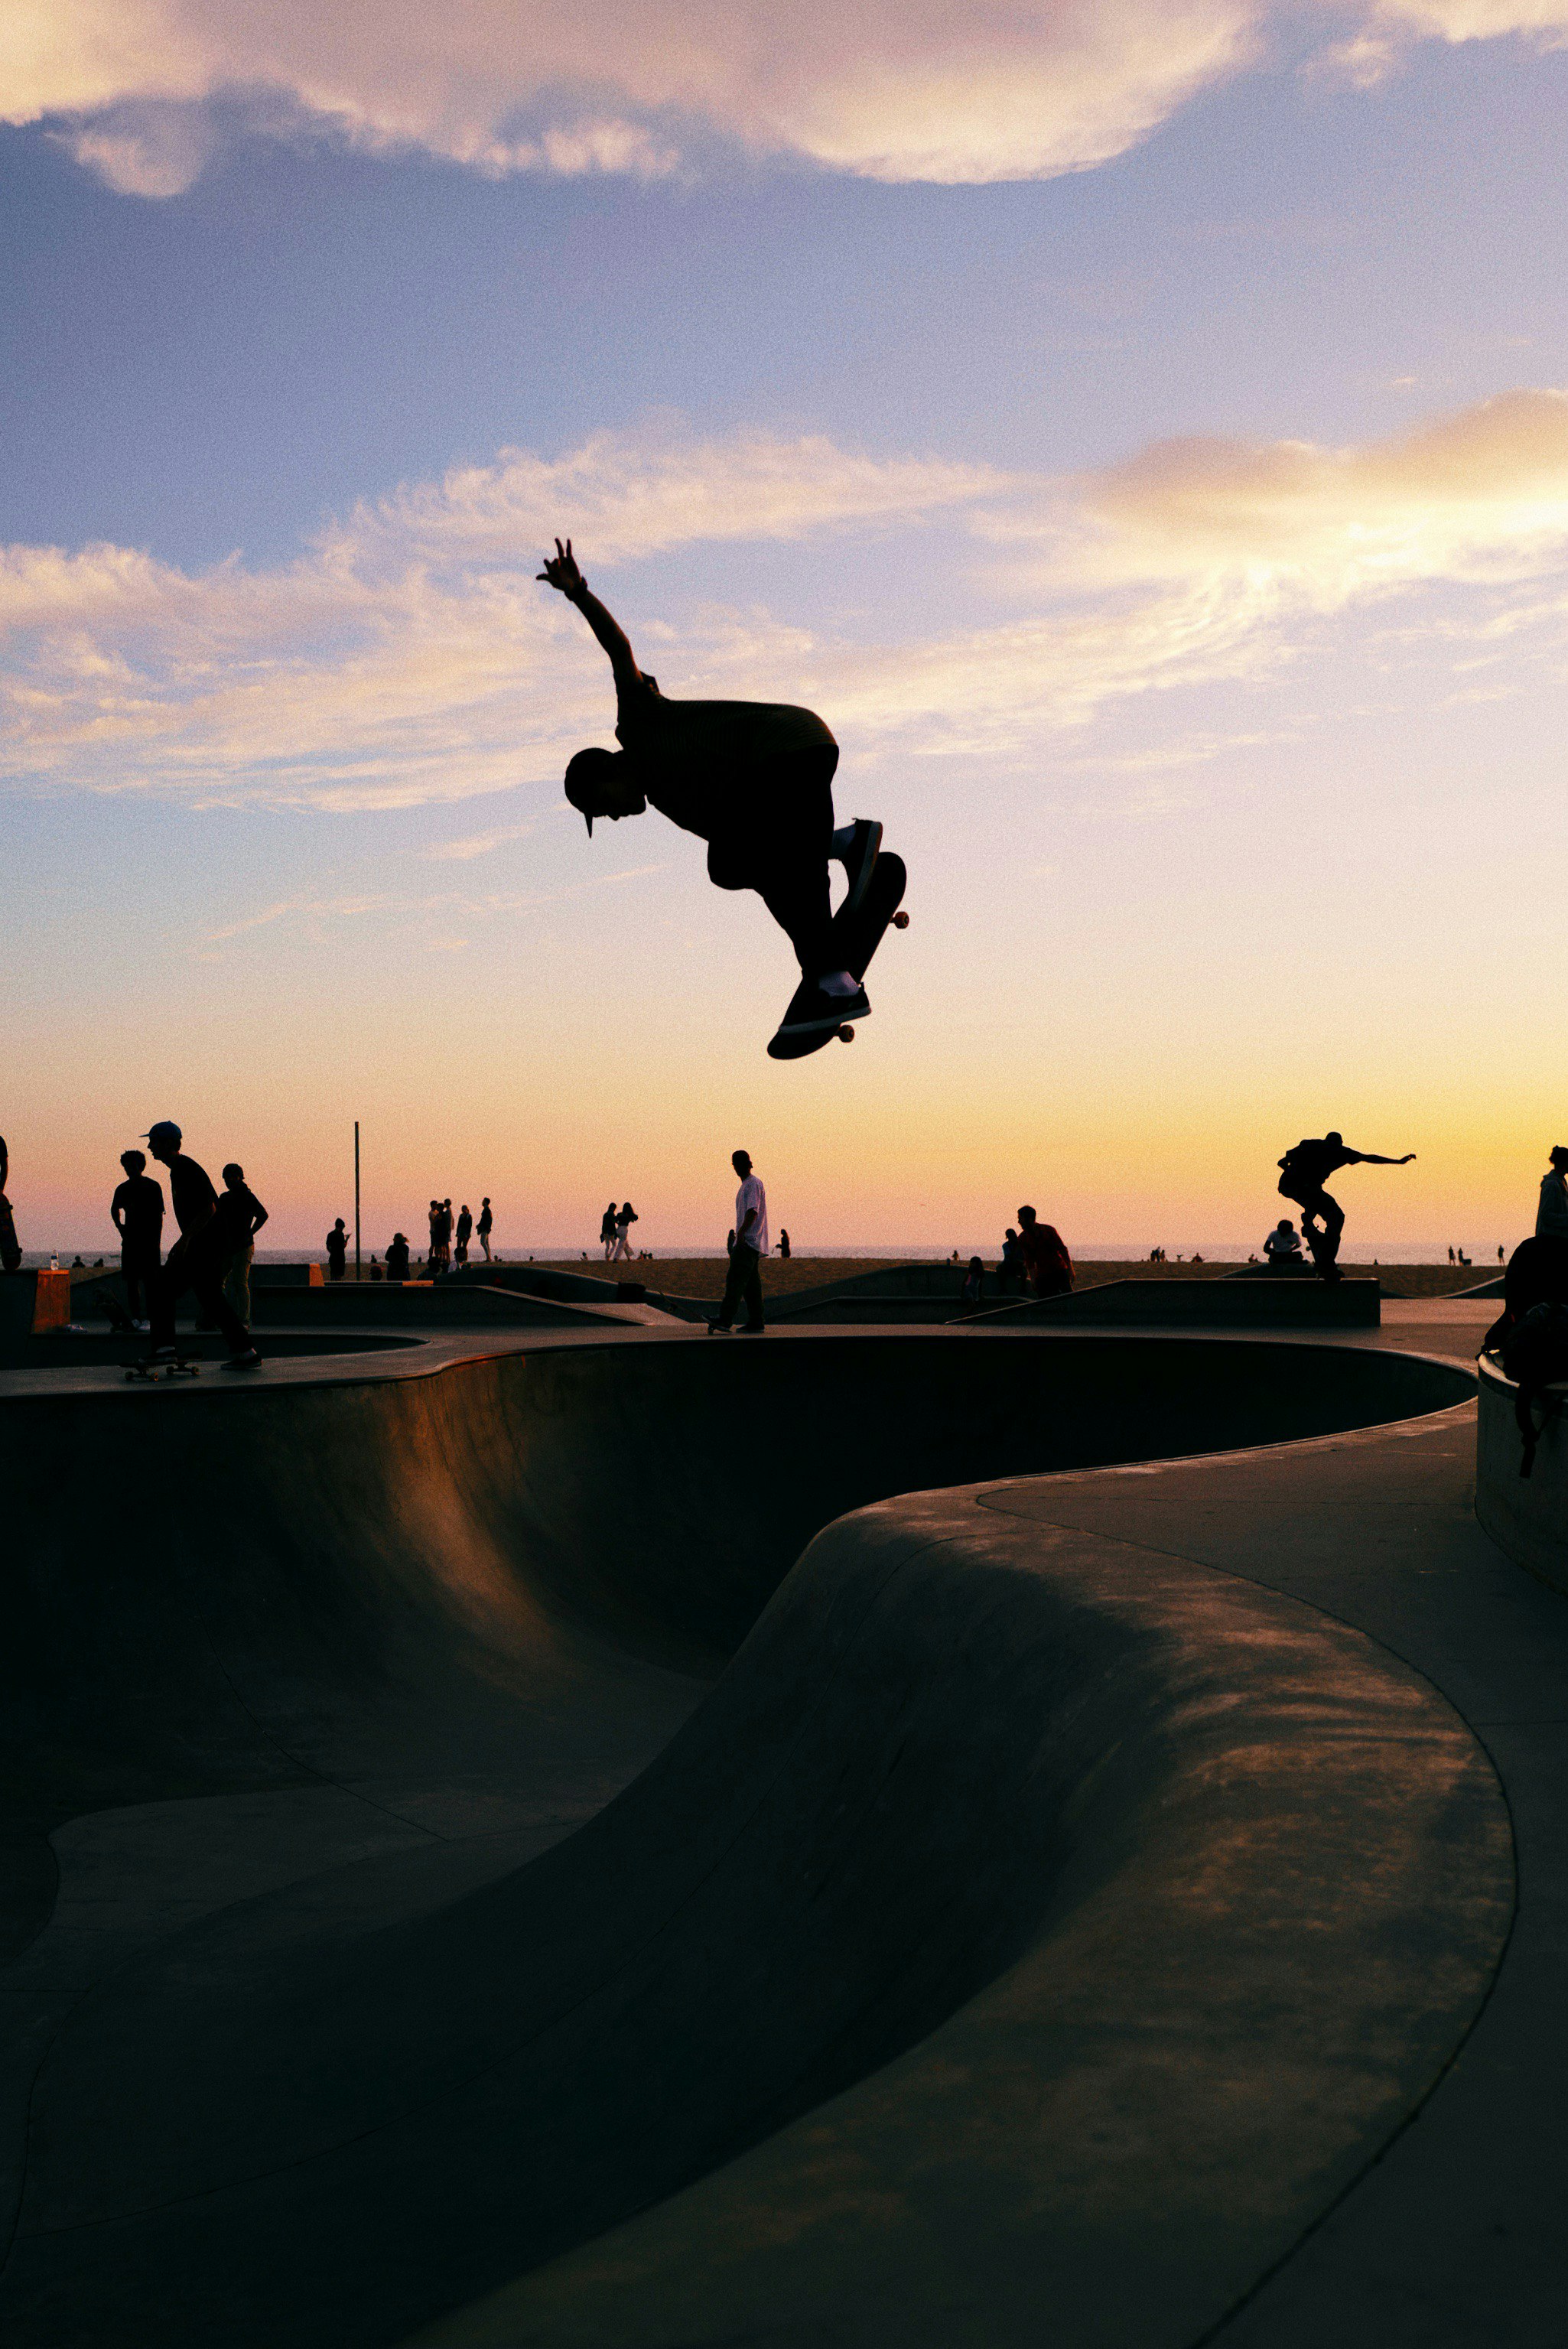 © pixelperfektion – thank you, for crediting and supporting us! Skateboarder at the venice beach doing a trick